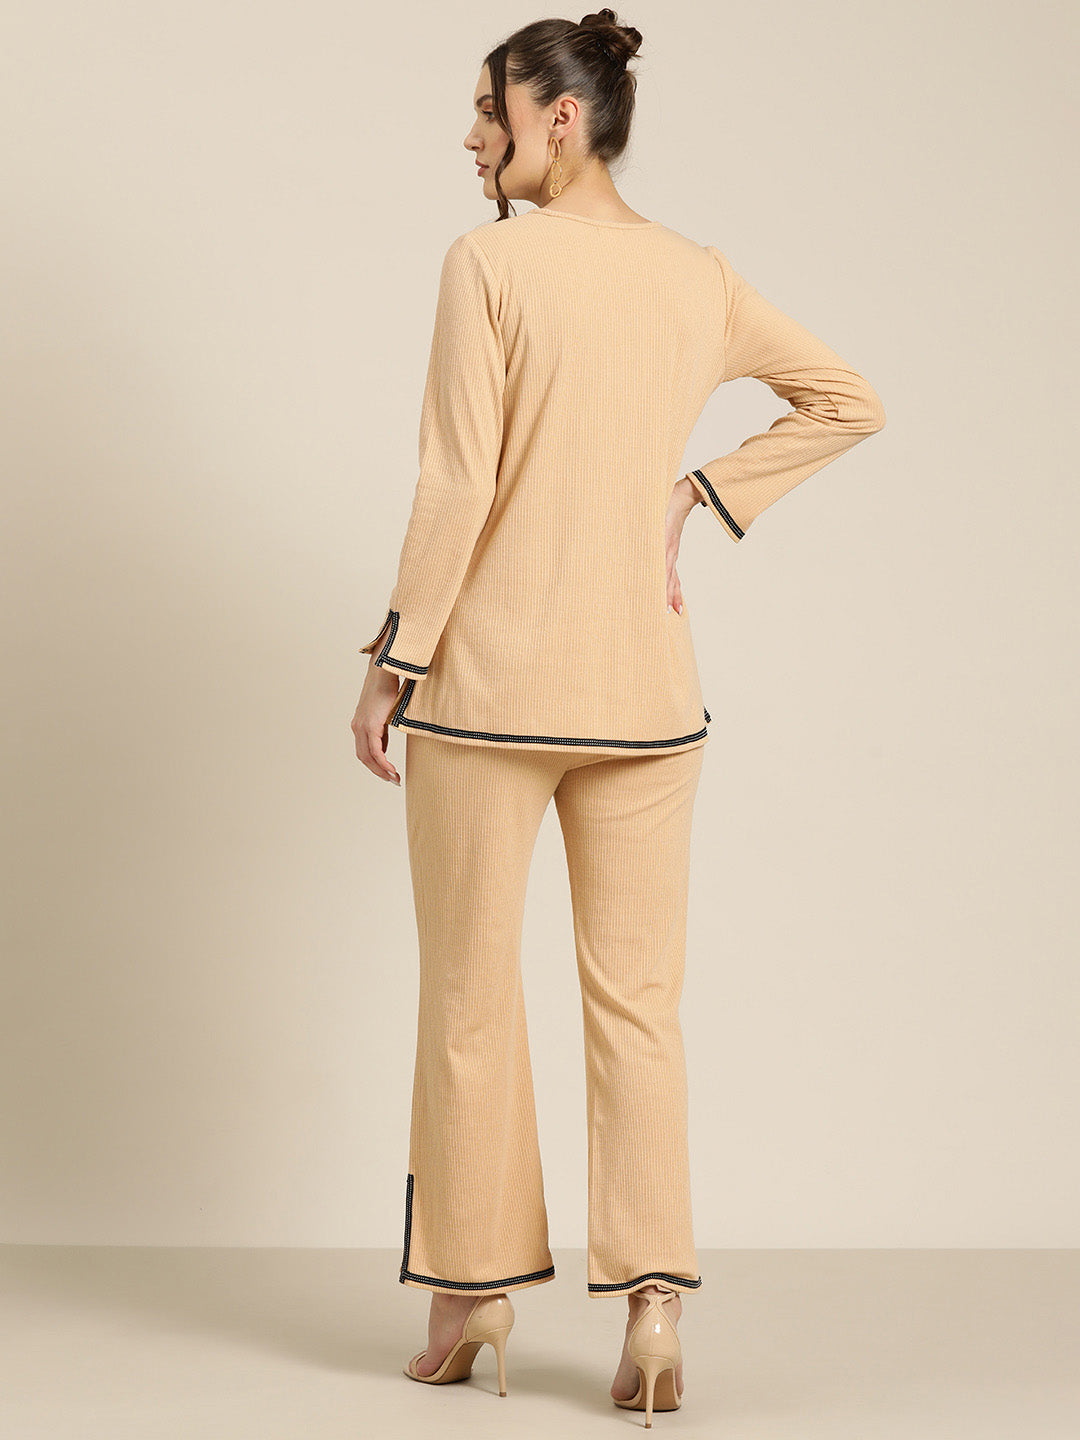 Beige solid rib V-Neck top with pant co-ord set.